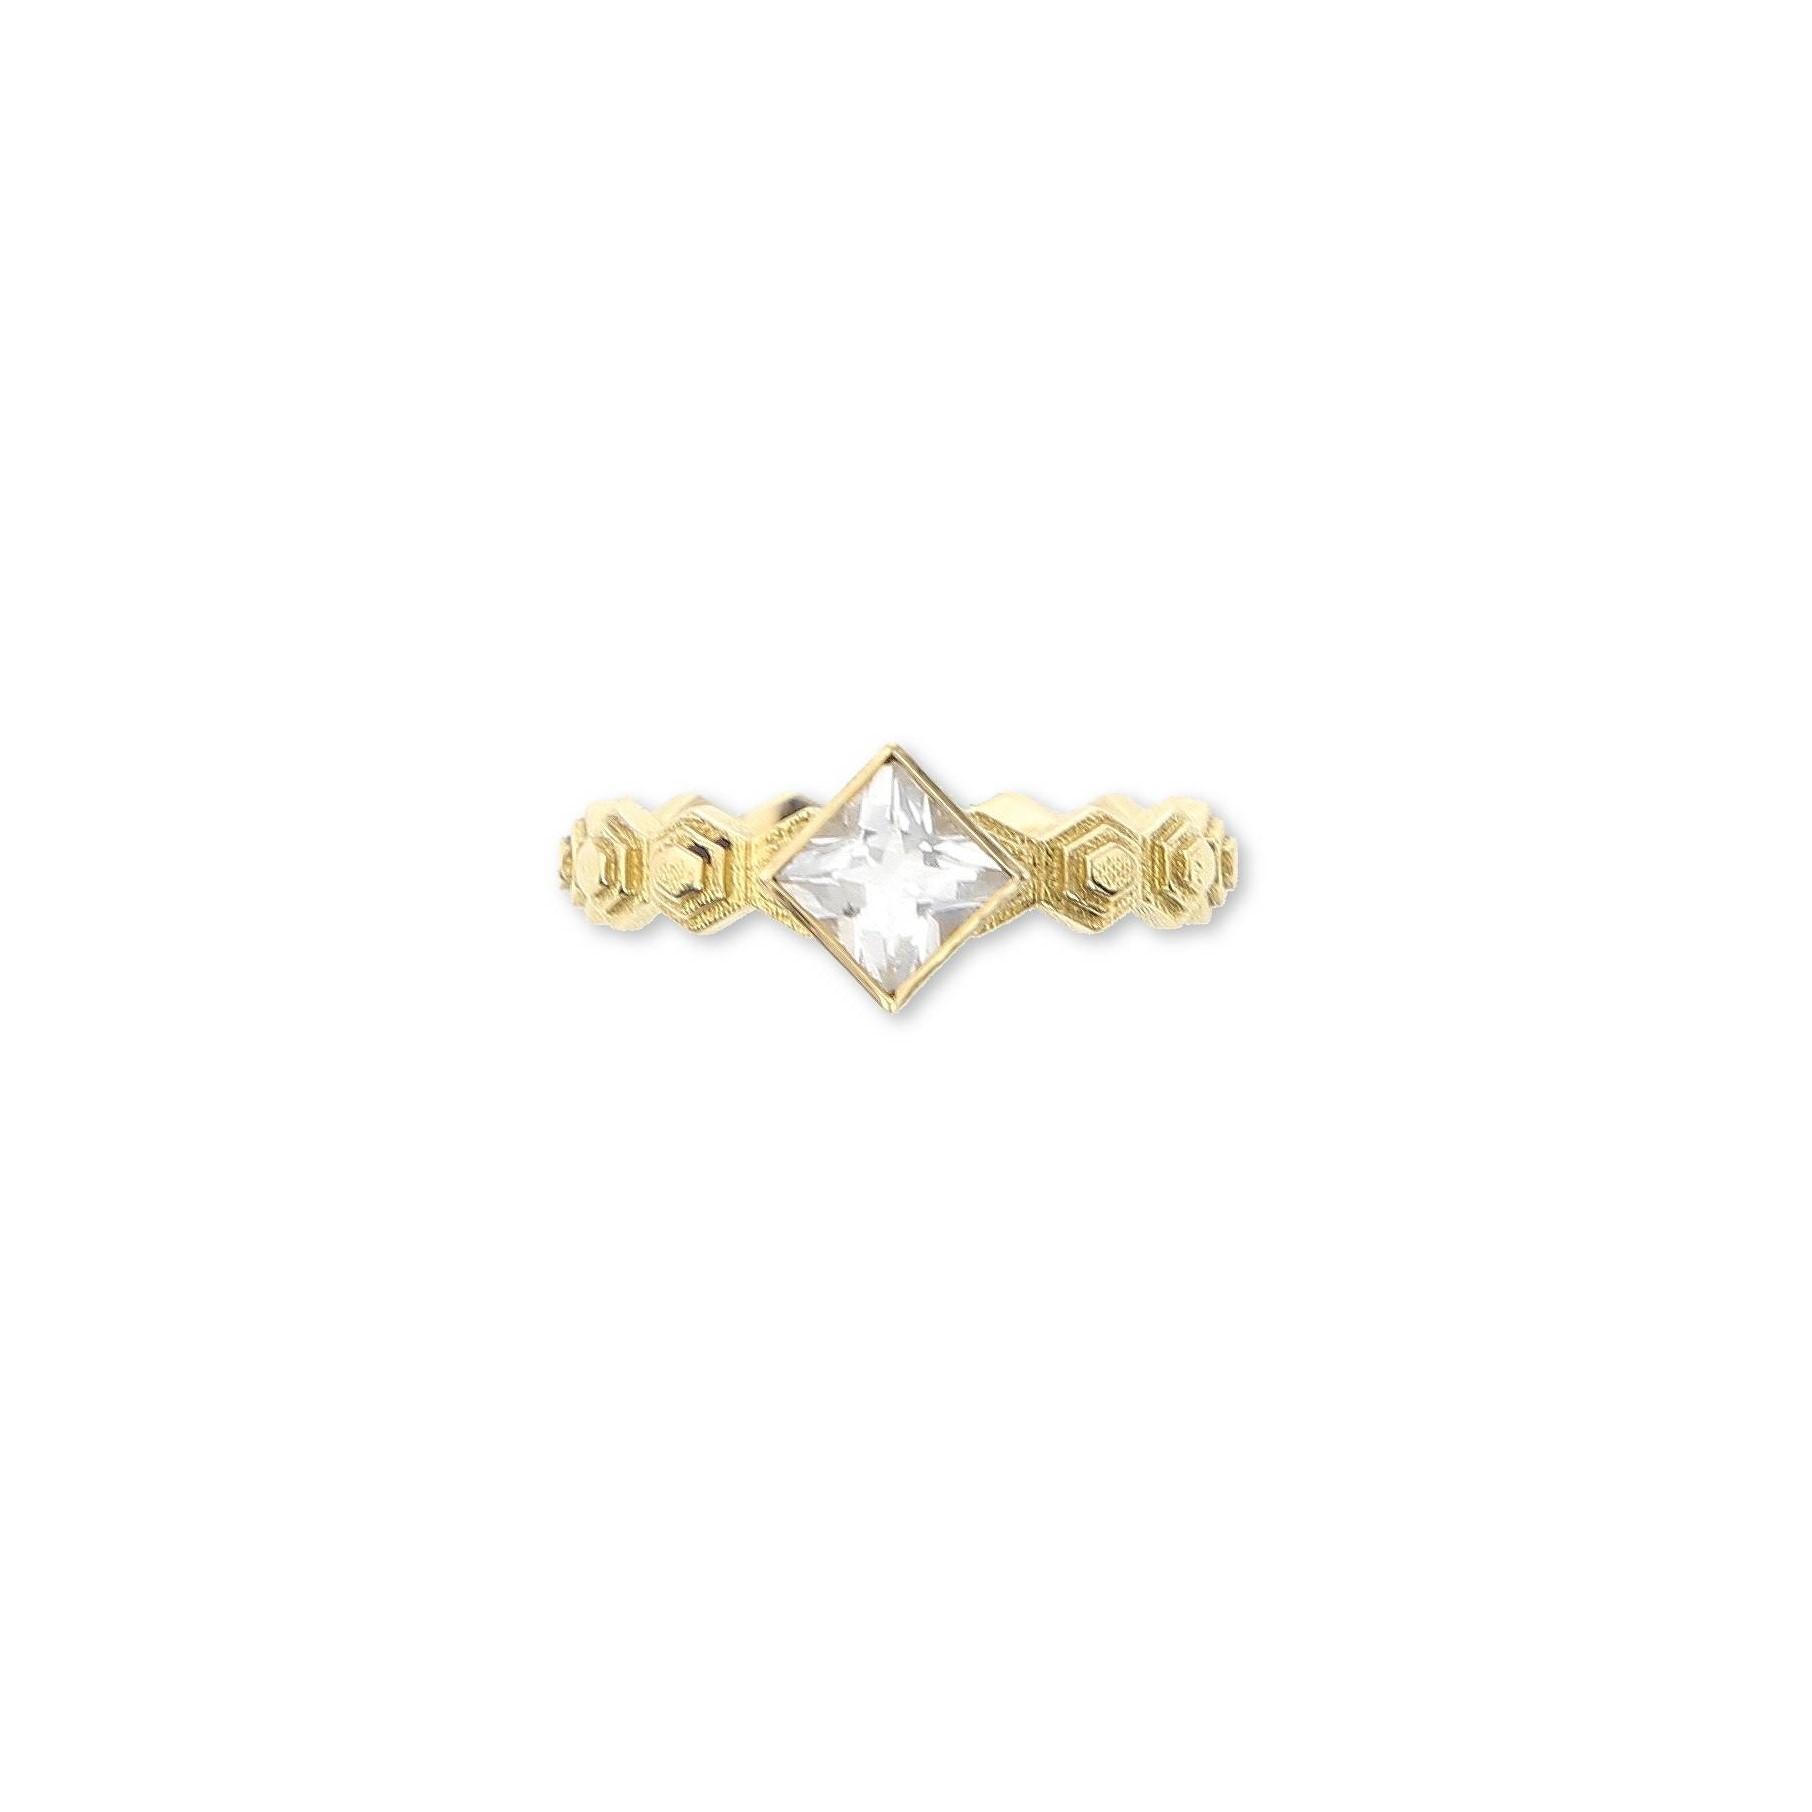 This ring is inspired by the hives made by bees. Indeed, bees are the main type of pollinator in many ecosystems containing flowering plants.

Unfortunately, bees, and other pollinator species, are currently critically endangered, with an extinction